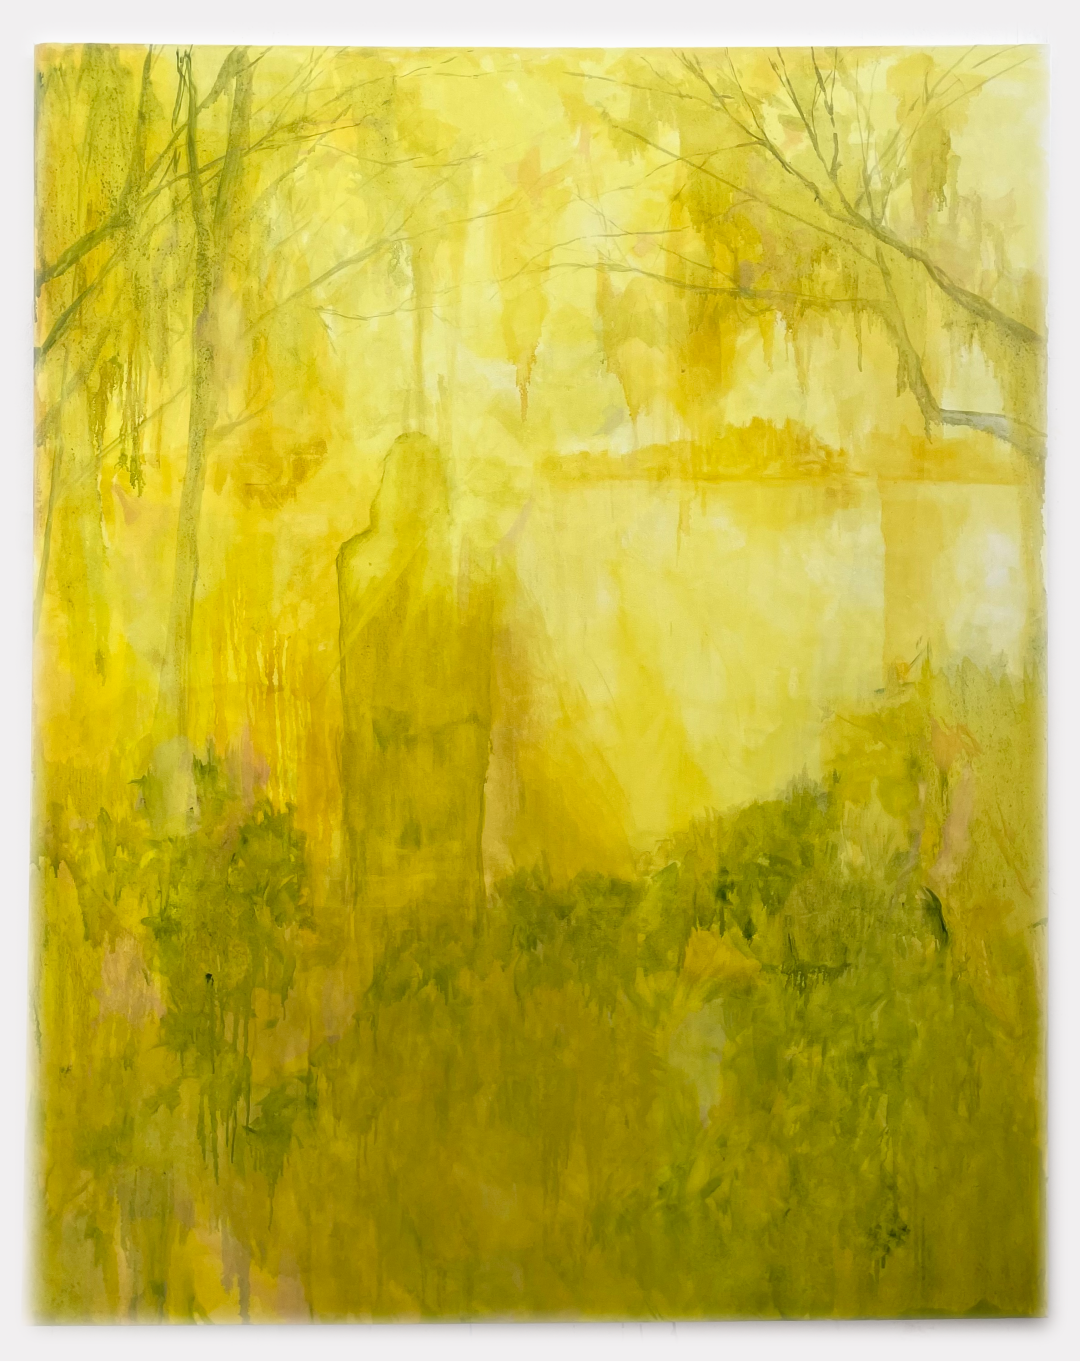 Large yellow oil painting